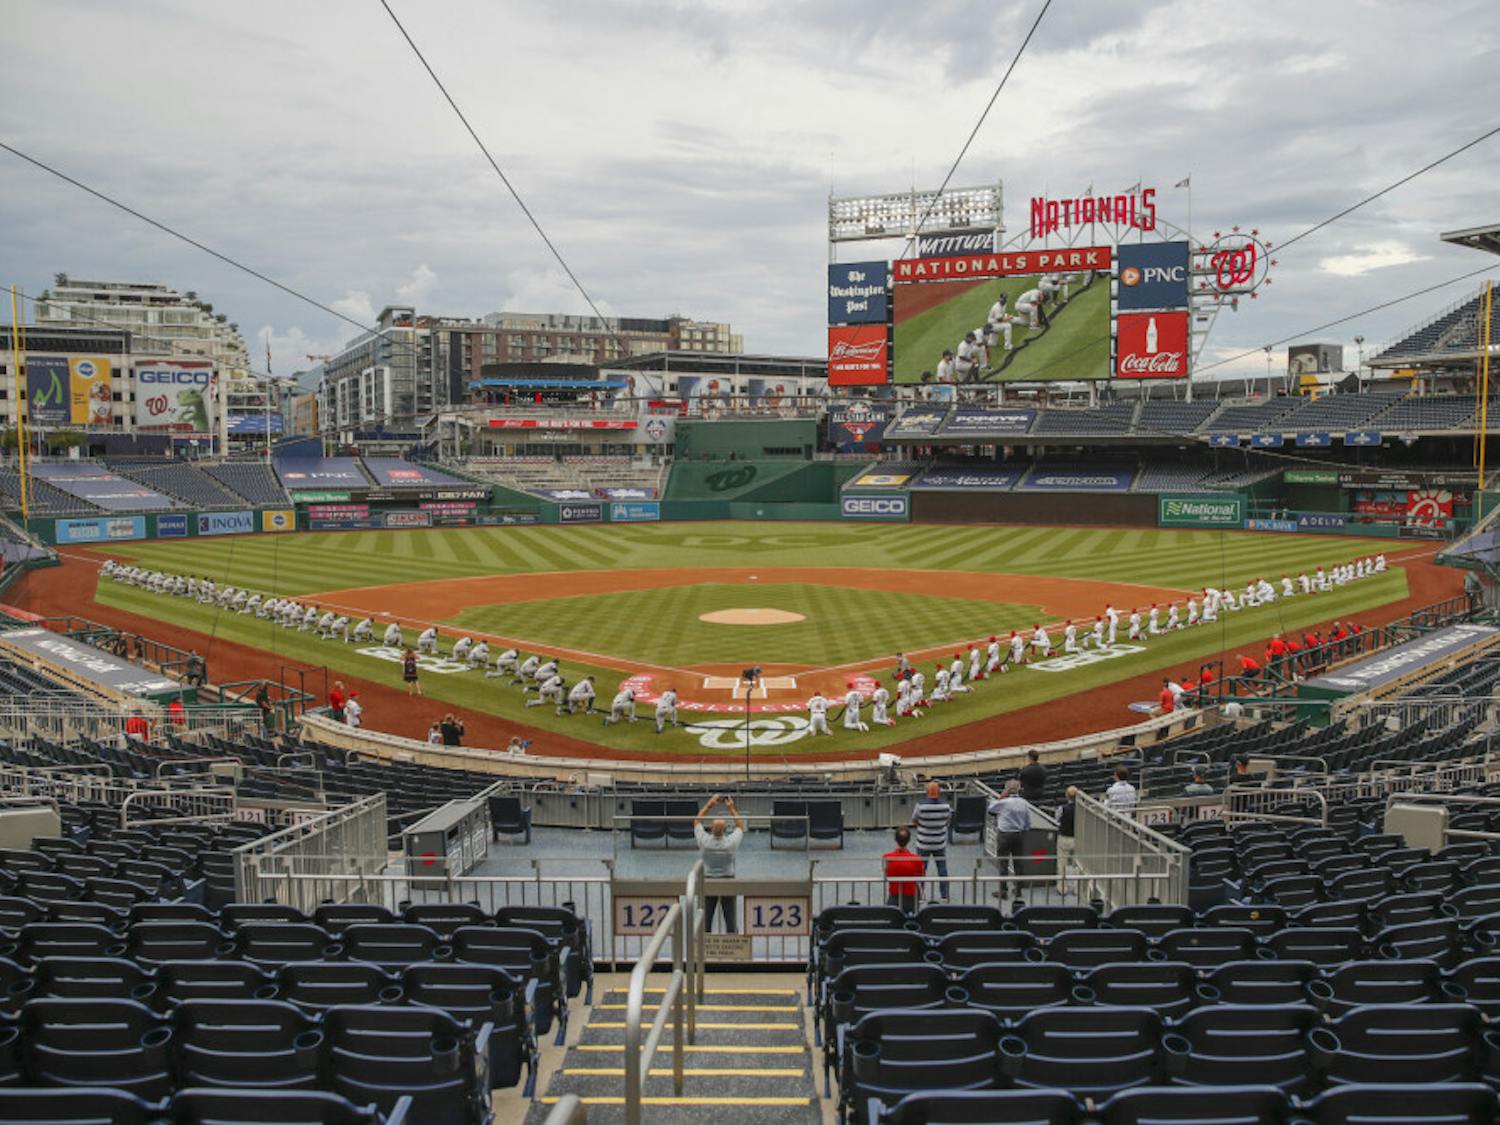 The New York Yankees and the Washington Nationals kneel while holding a black ribbon to honor Black Lives Matter before playing an opening day baseball game at Nationals Park, Thursday, July 23, 2020, in Washington. before the start of the first inning of an opening day baseball game at Nationals Park, Thursday, July 23, 2020, in Washington. (AP Photo/Alex Brandon)